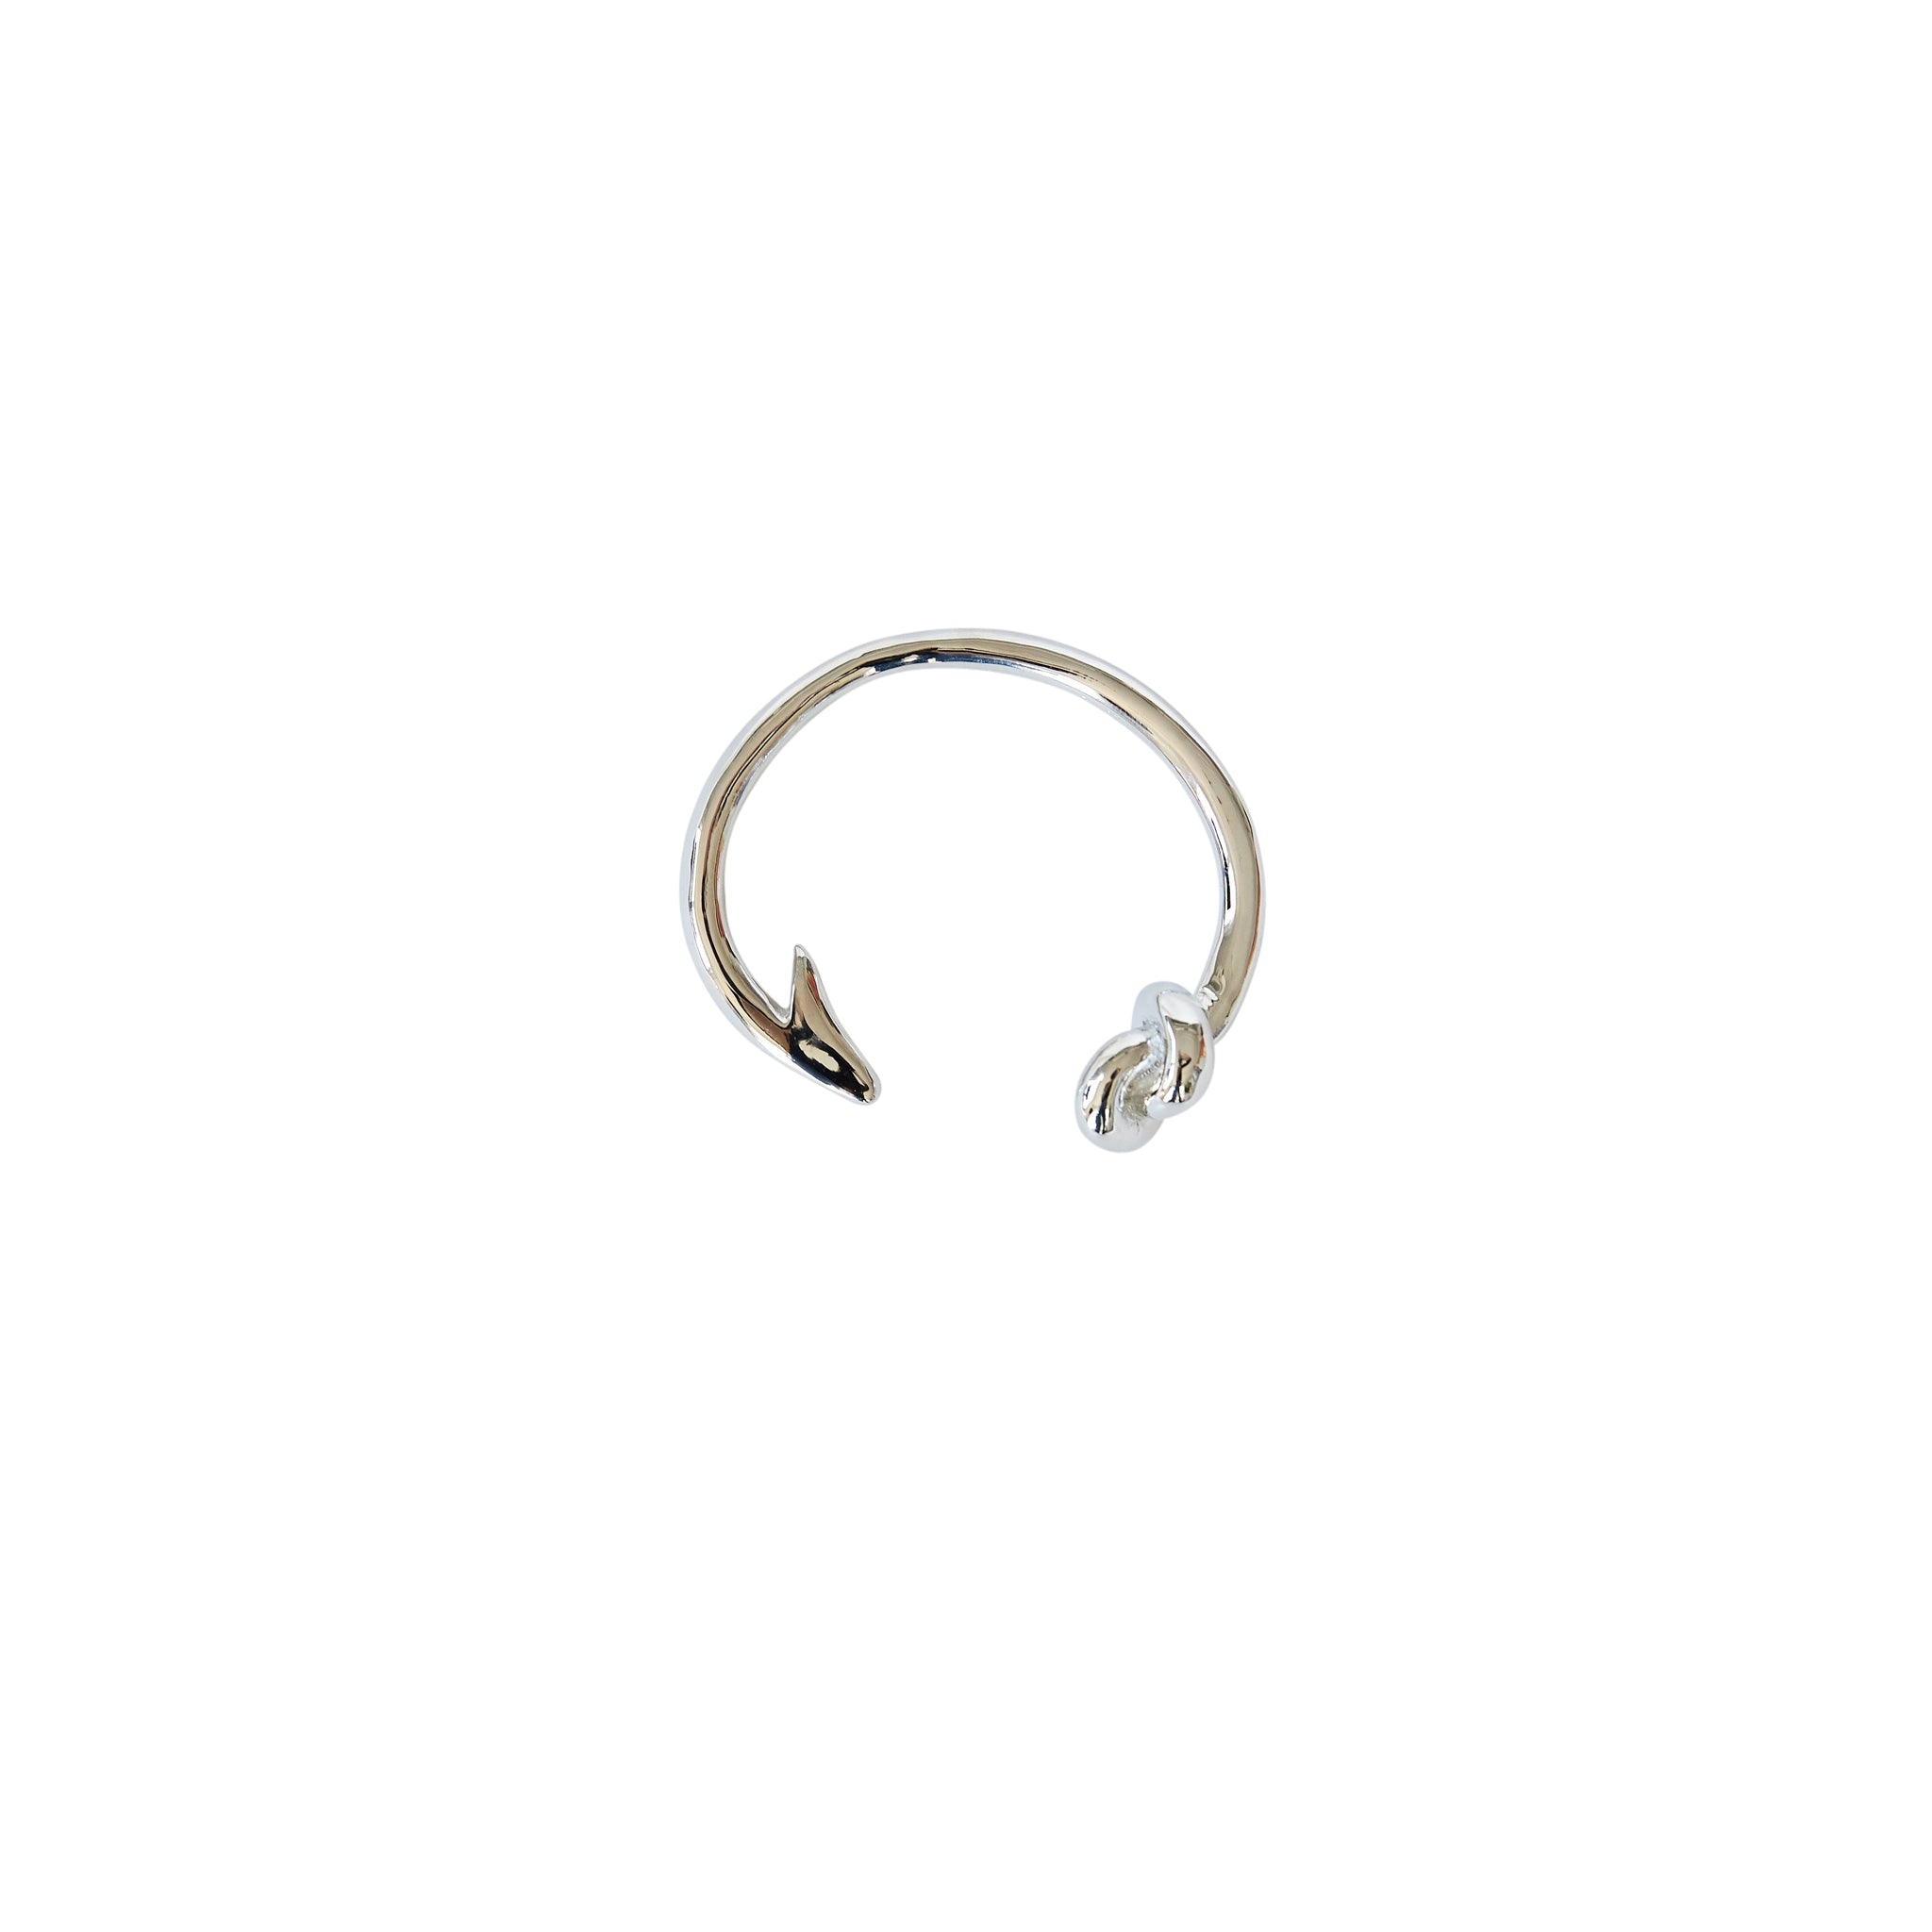 Hook and Knot Bangle in Silver